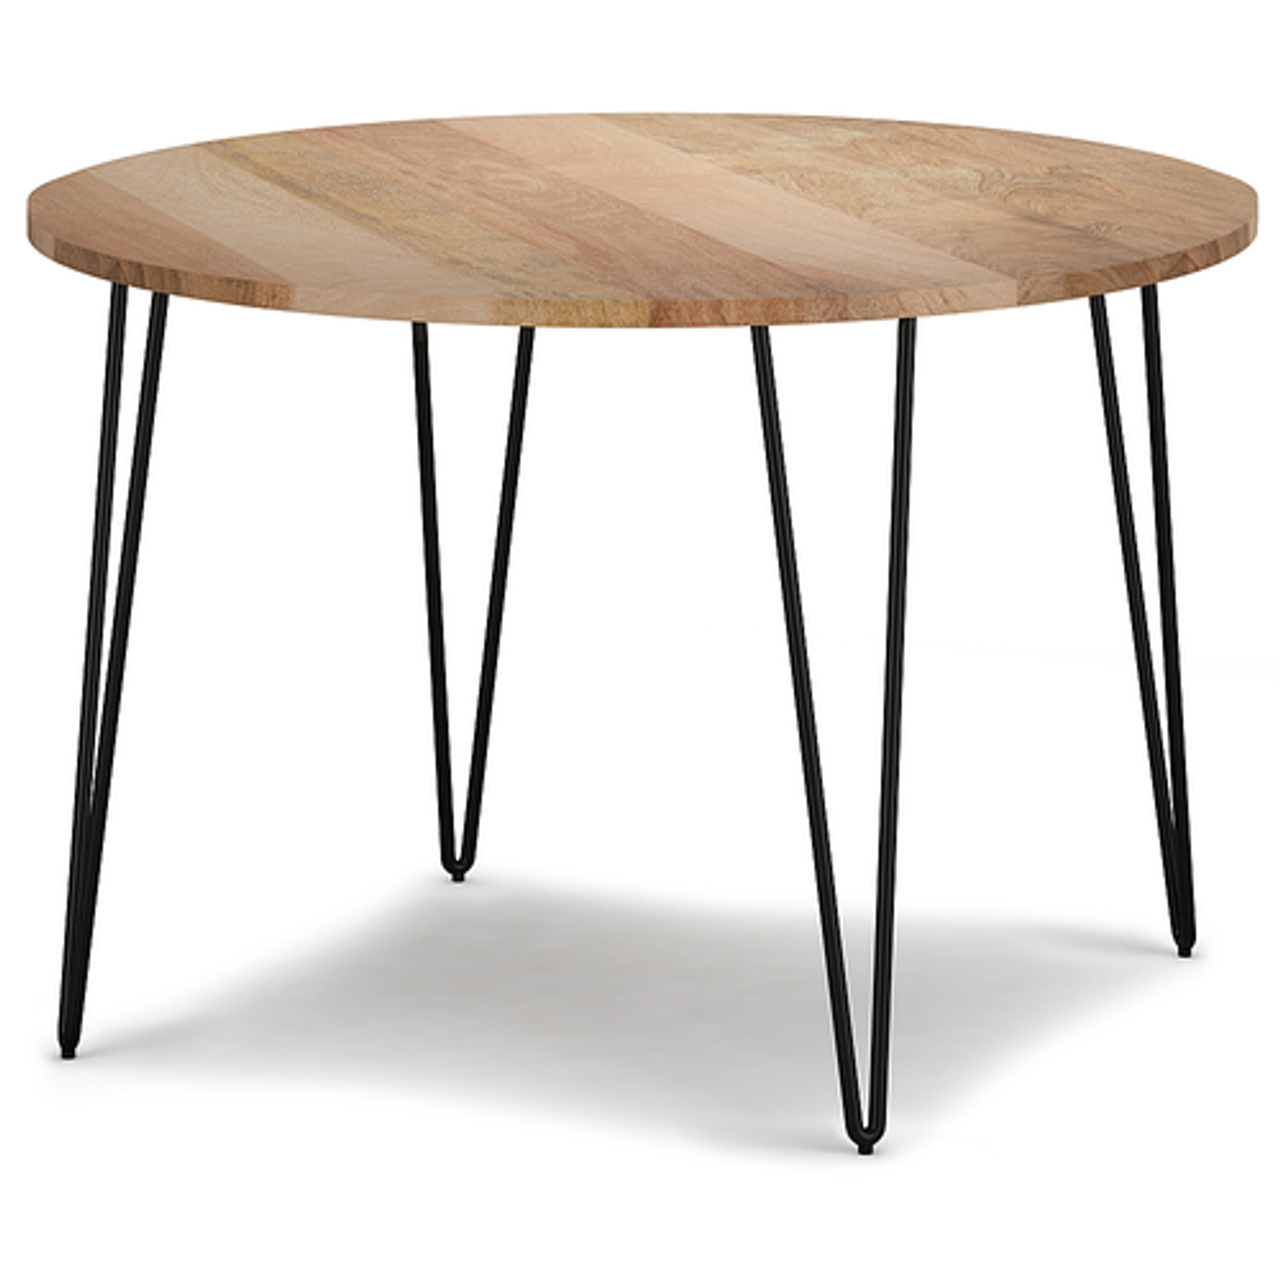 Simpli Home - Hunter 45 Inch Round Dining Table - Natural